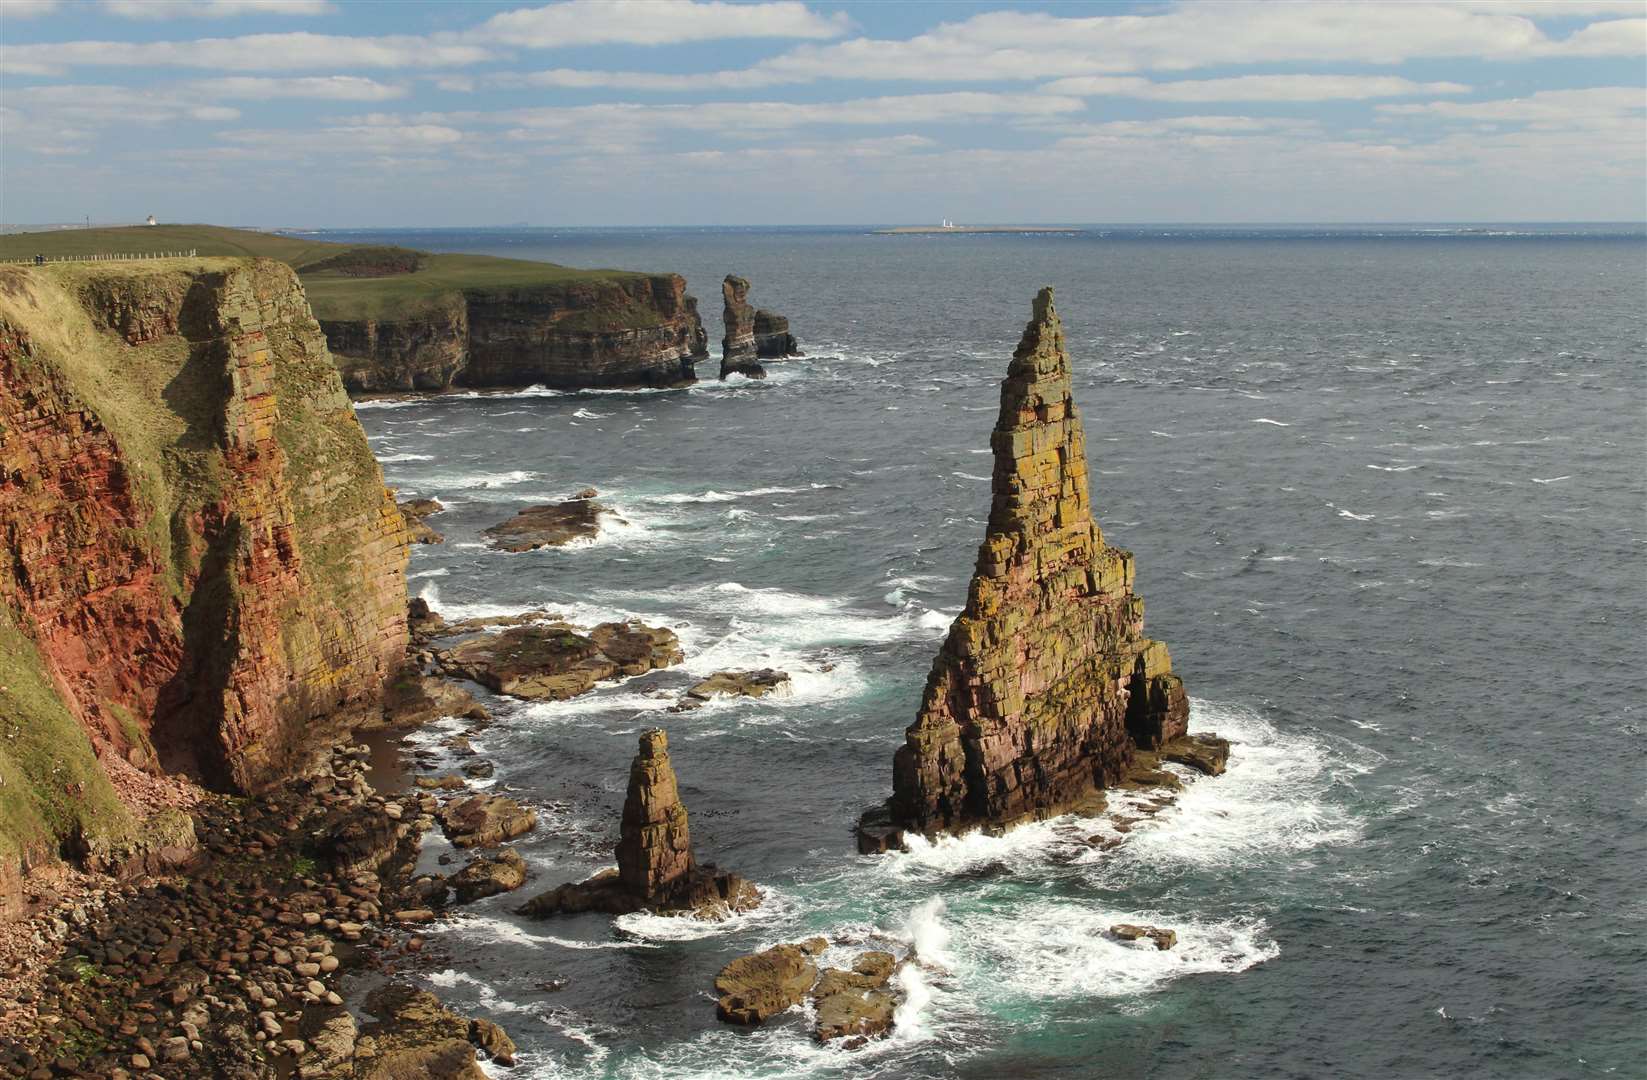 Until further notice, the public will not be allowed to use the Duncansby Head car park allowing access to the coastal path overlooking the famous stacks. Picture: Alan Hendry